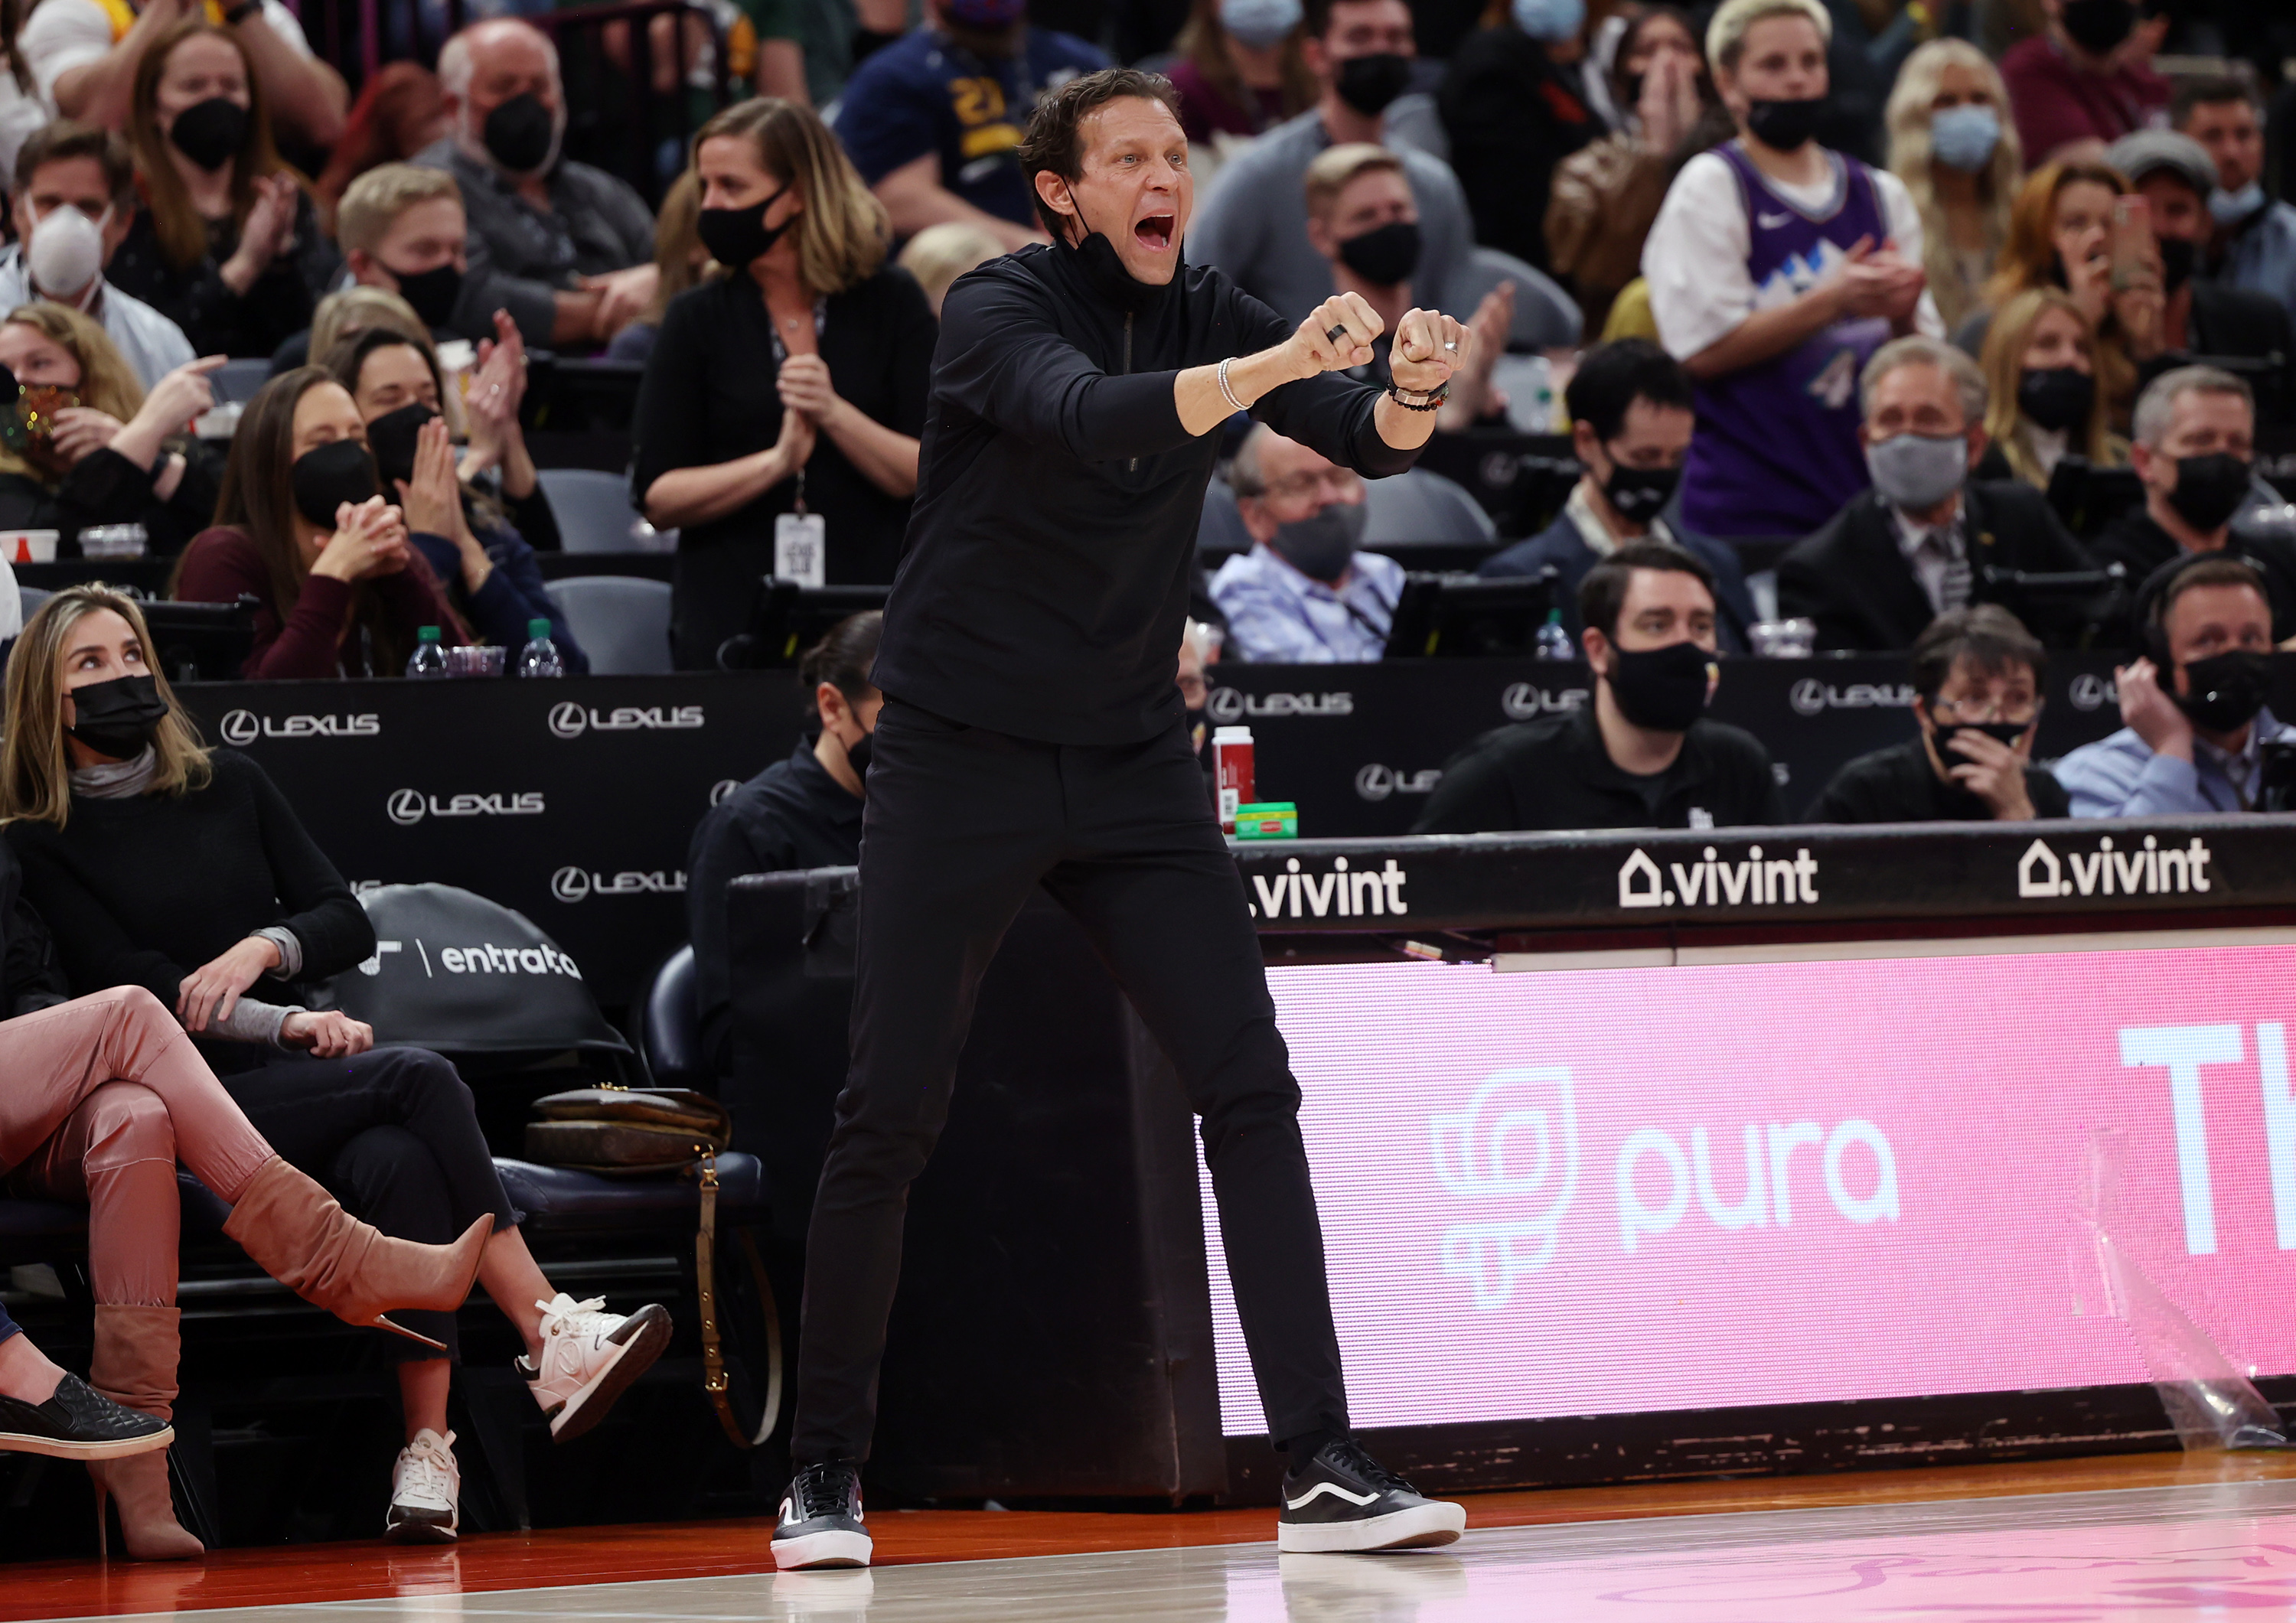 Utah’s head coach Quin Snyder, calls out instructions as the jazz make a small run late in the game as the Utah Jazz and the Houston Rockets play at Vivint Arena in Salt Lake City on Wednesday, Jan. 19, 2022. Houston won 116-111.